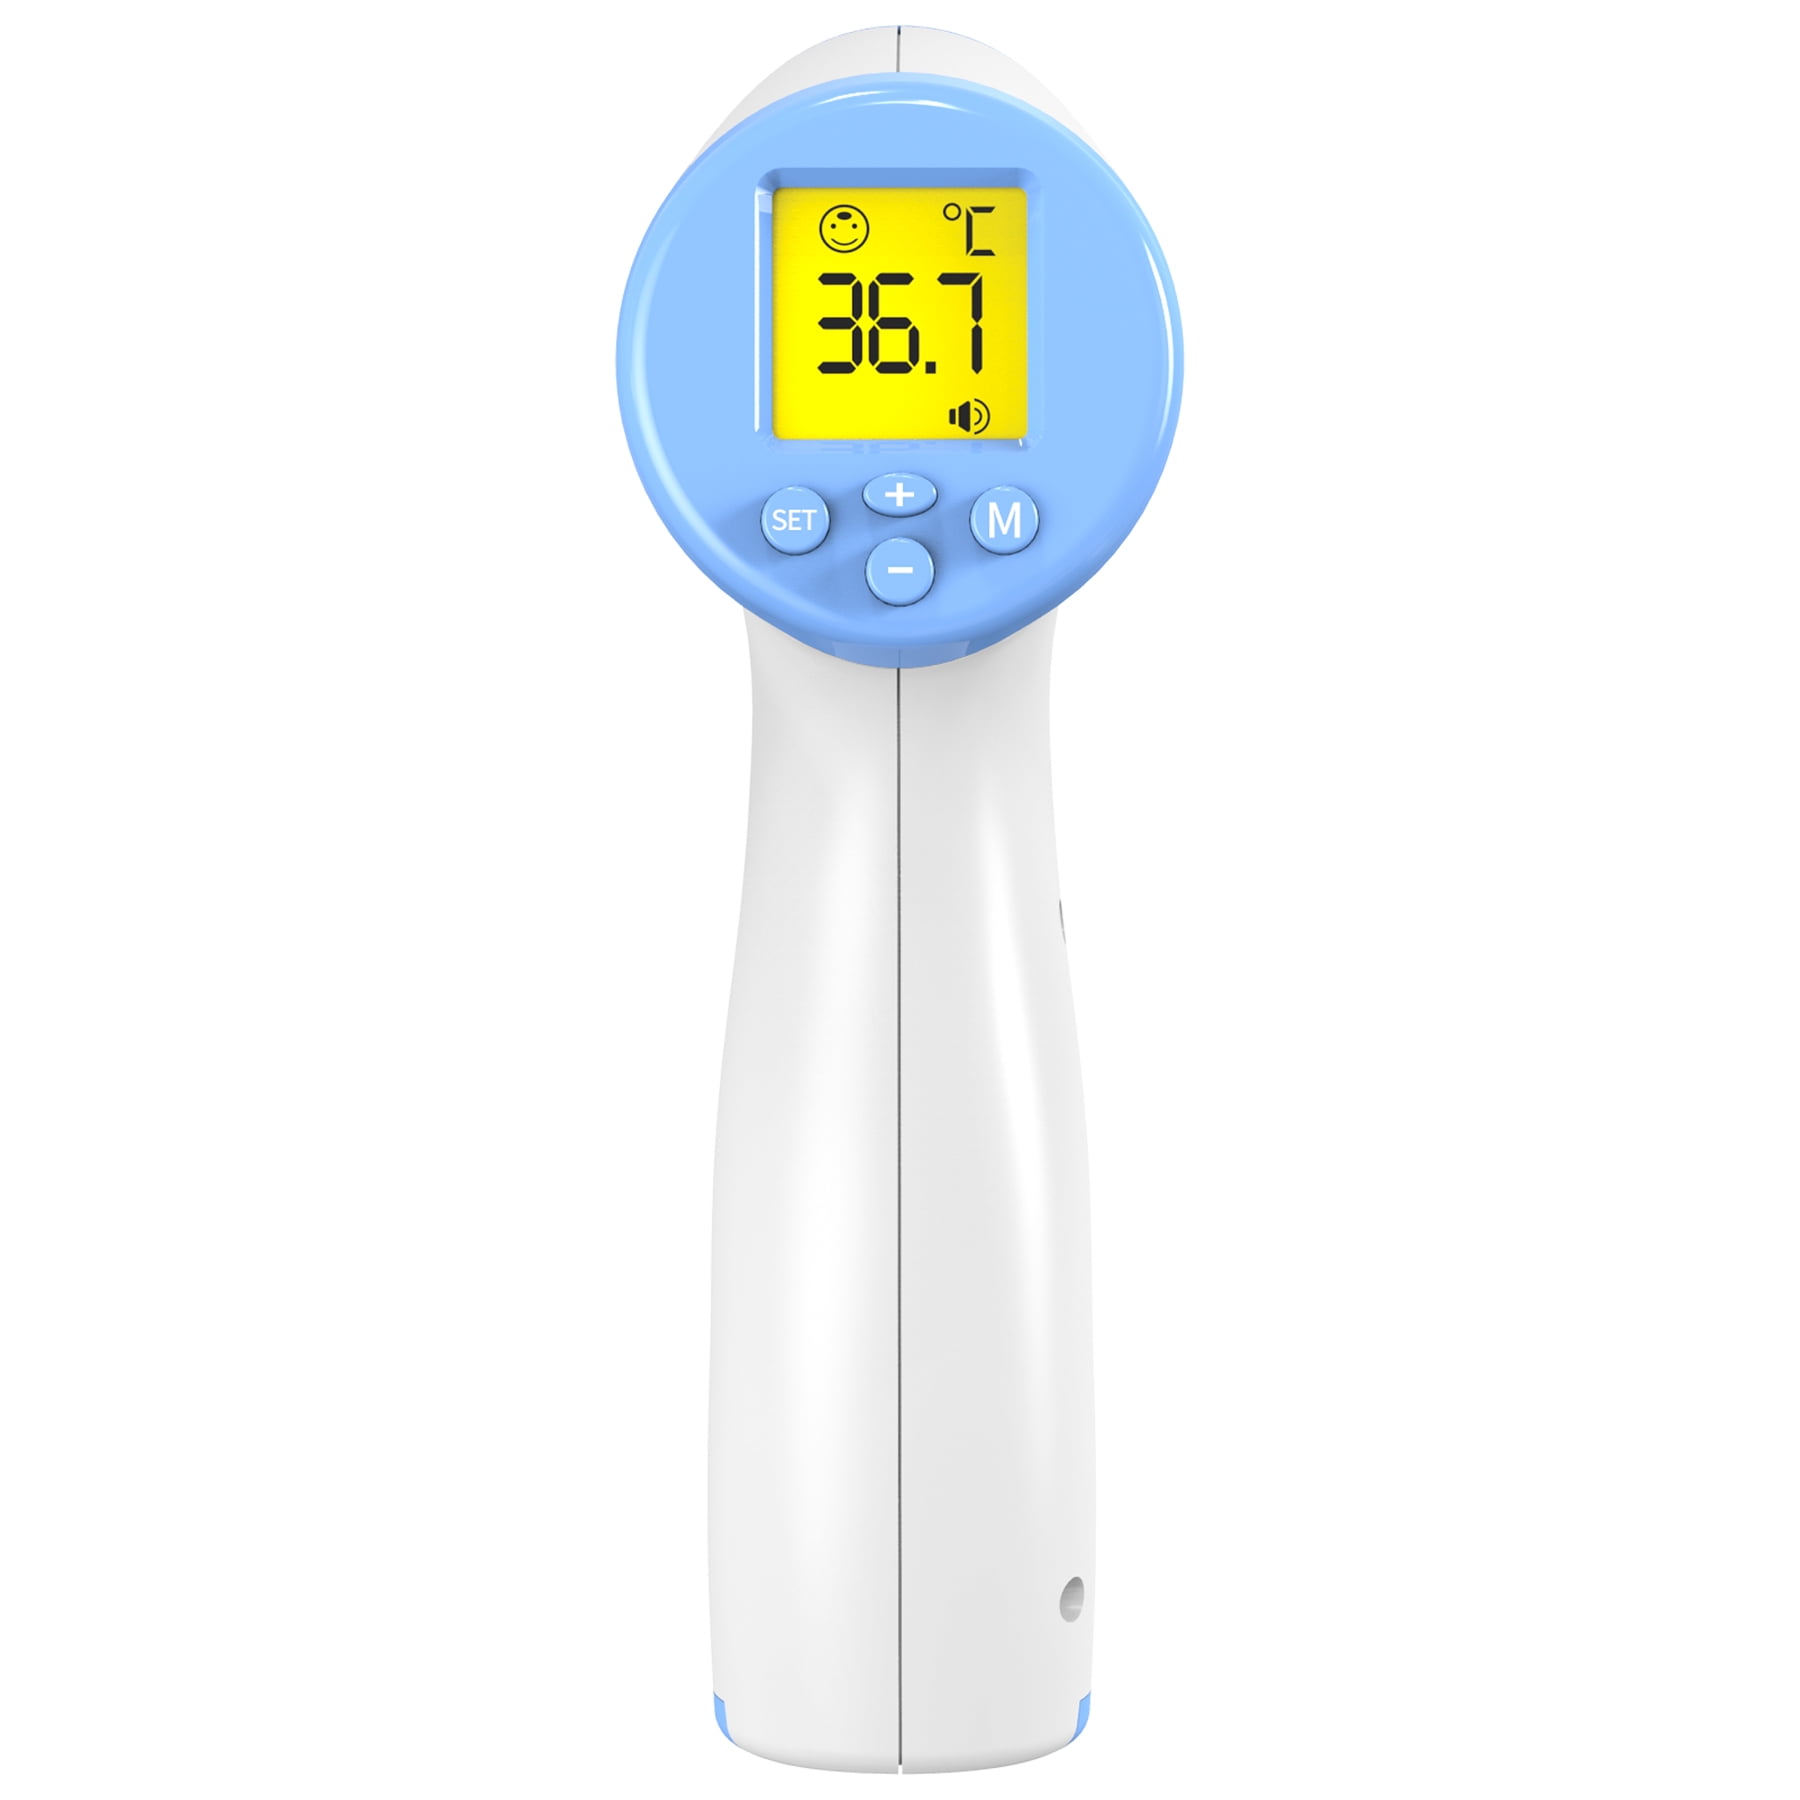 Basic Digital Body Thermometer in Celsius : ID 4596 : $8.95 : Adafruit  Industries, Unique & fun DIY electronics and kits